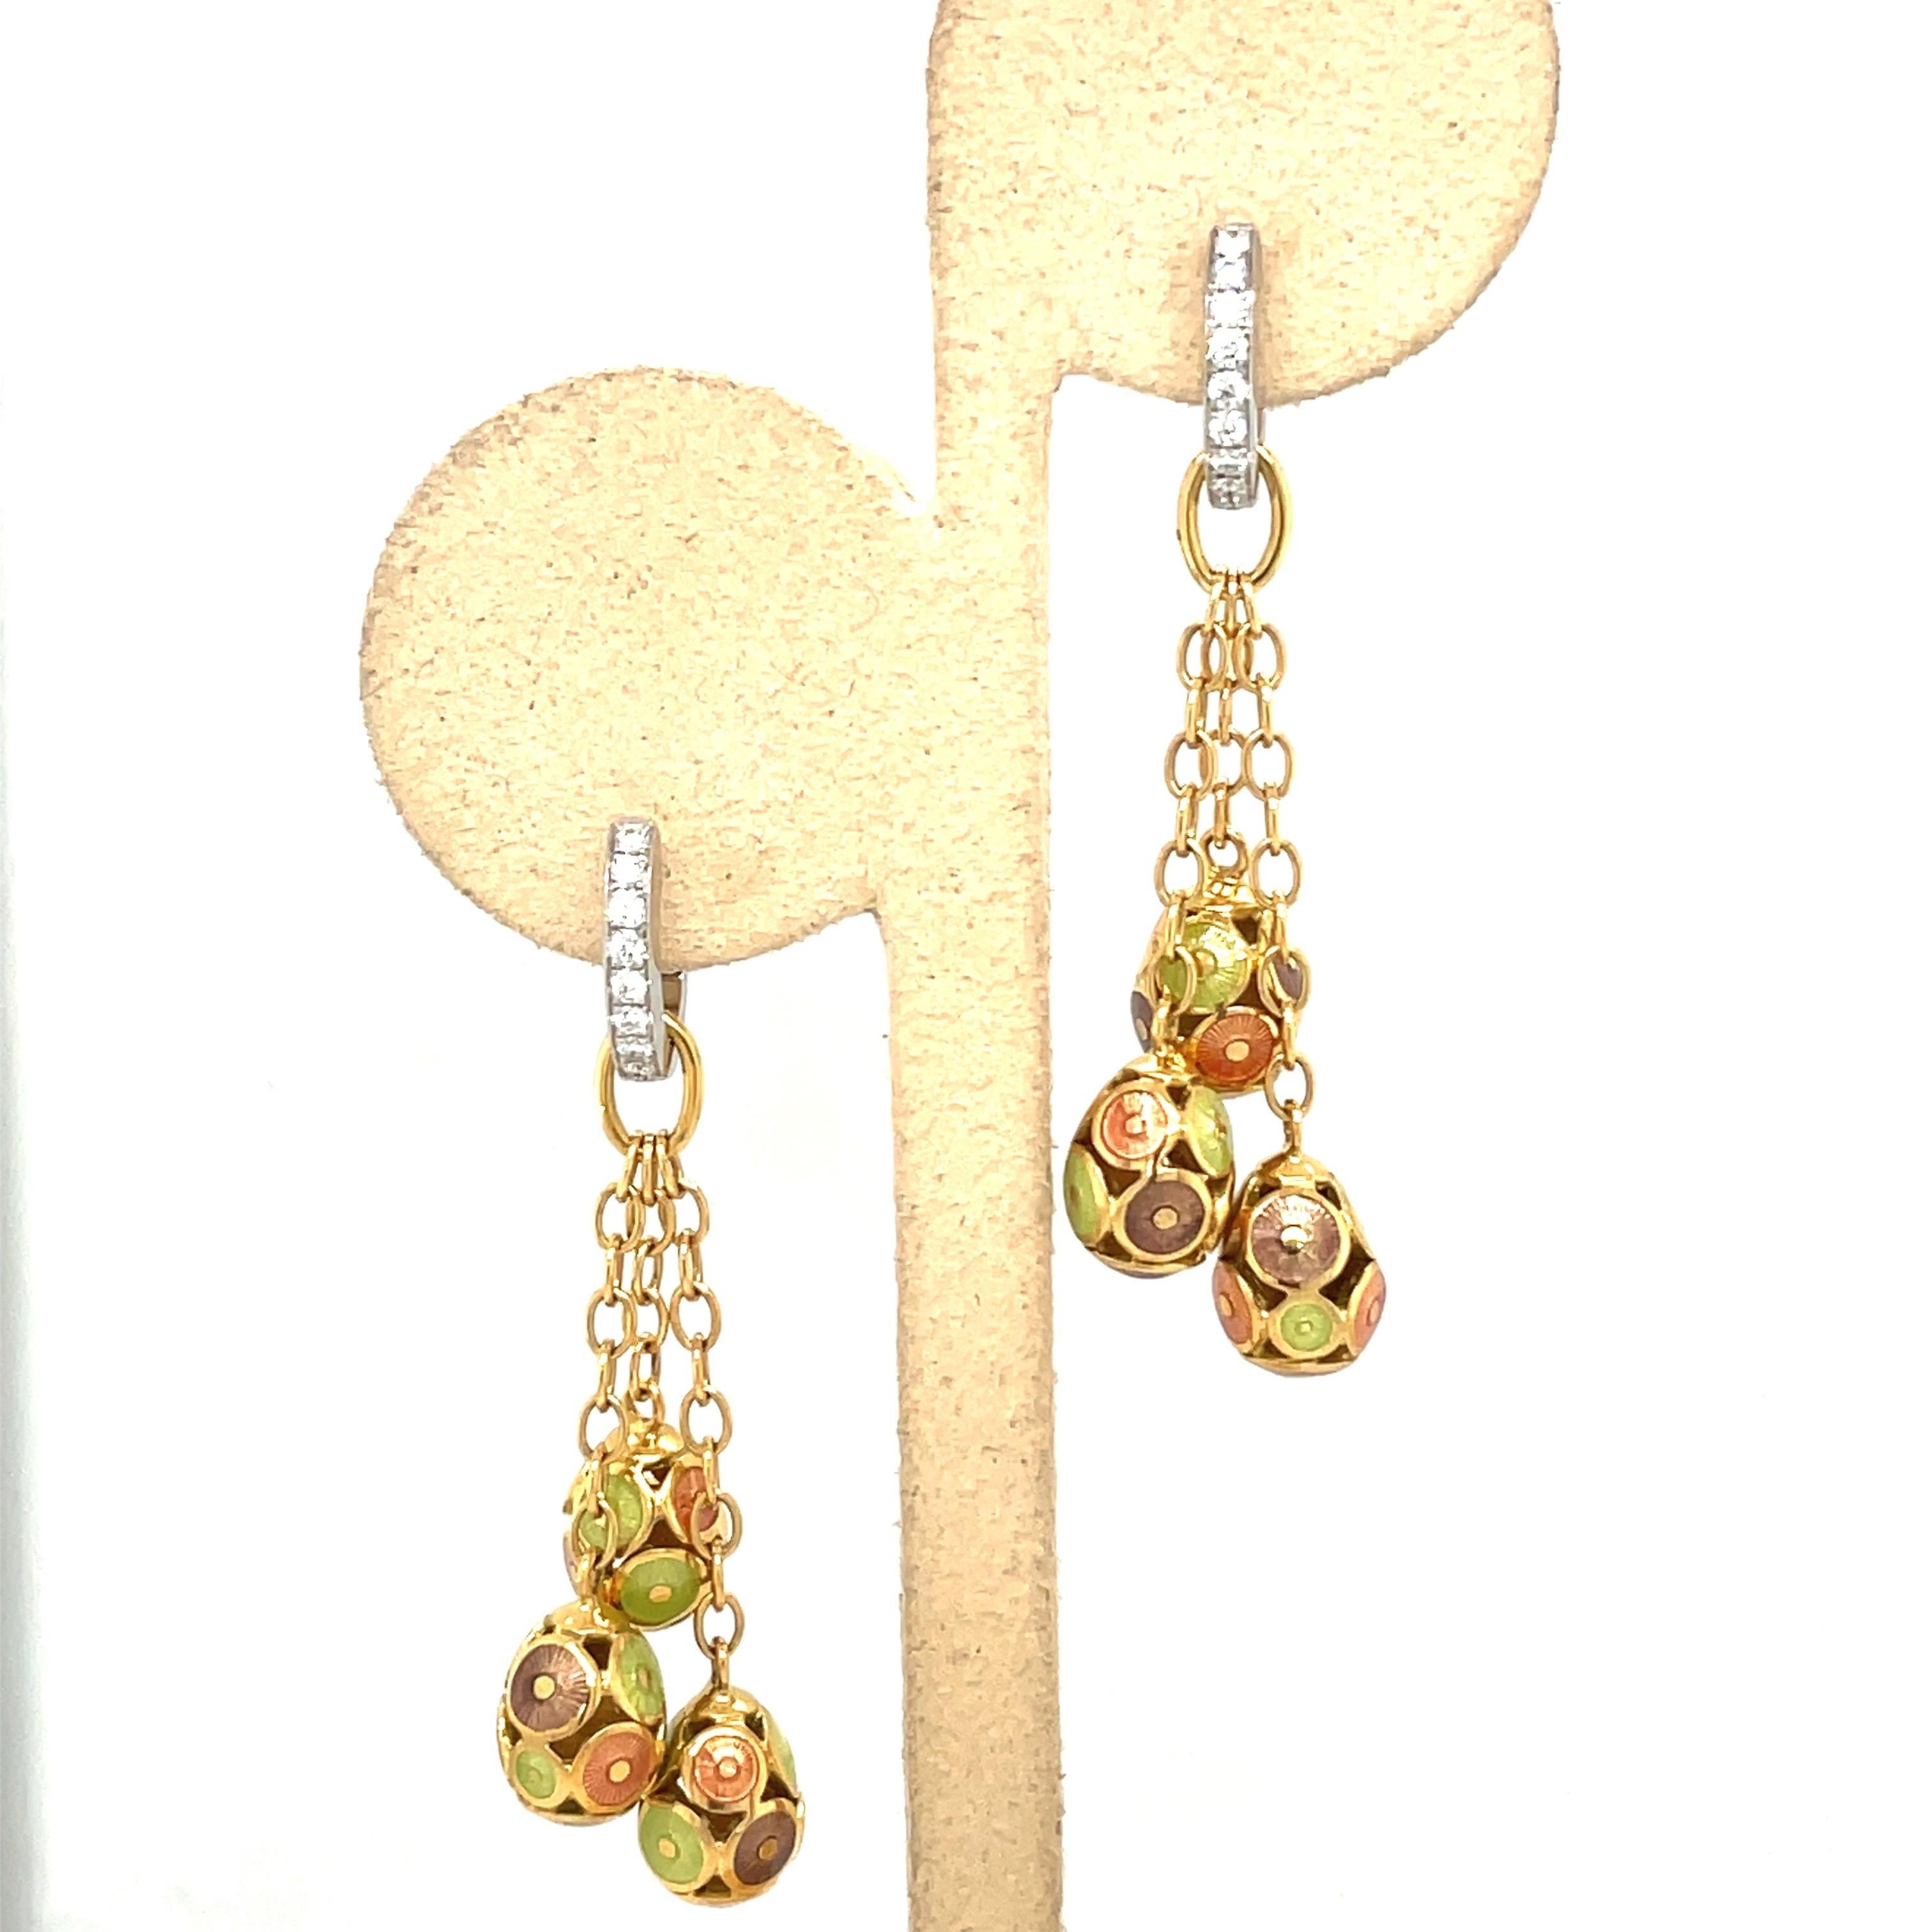 Faberge 18KT Yellow & White Gold Diamond 0.27Ct. & Enamel Eggs Hanging Earrings In New Condition For Sale In New York, NY